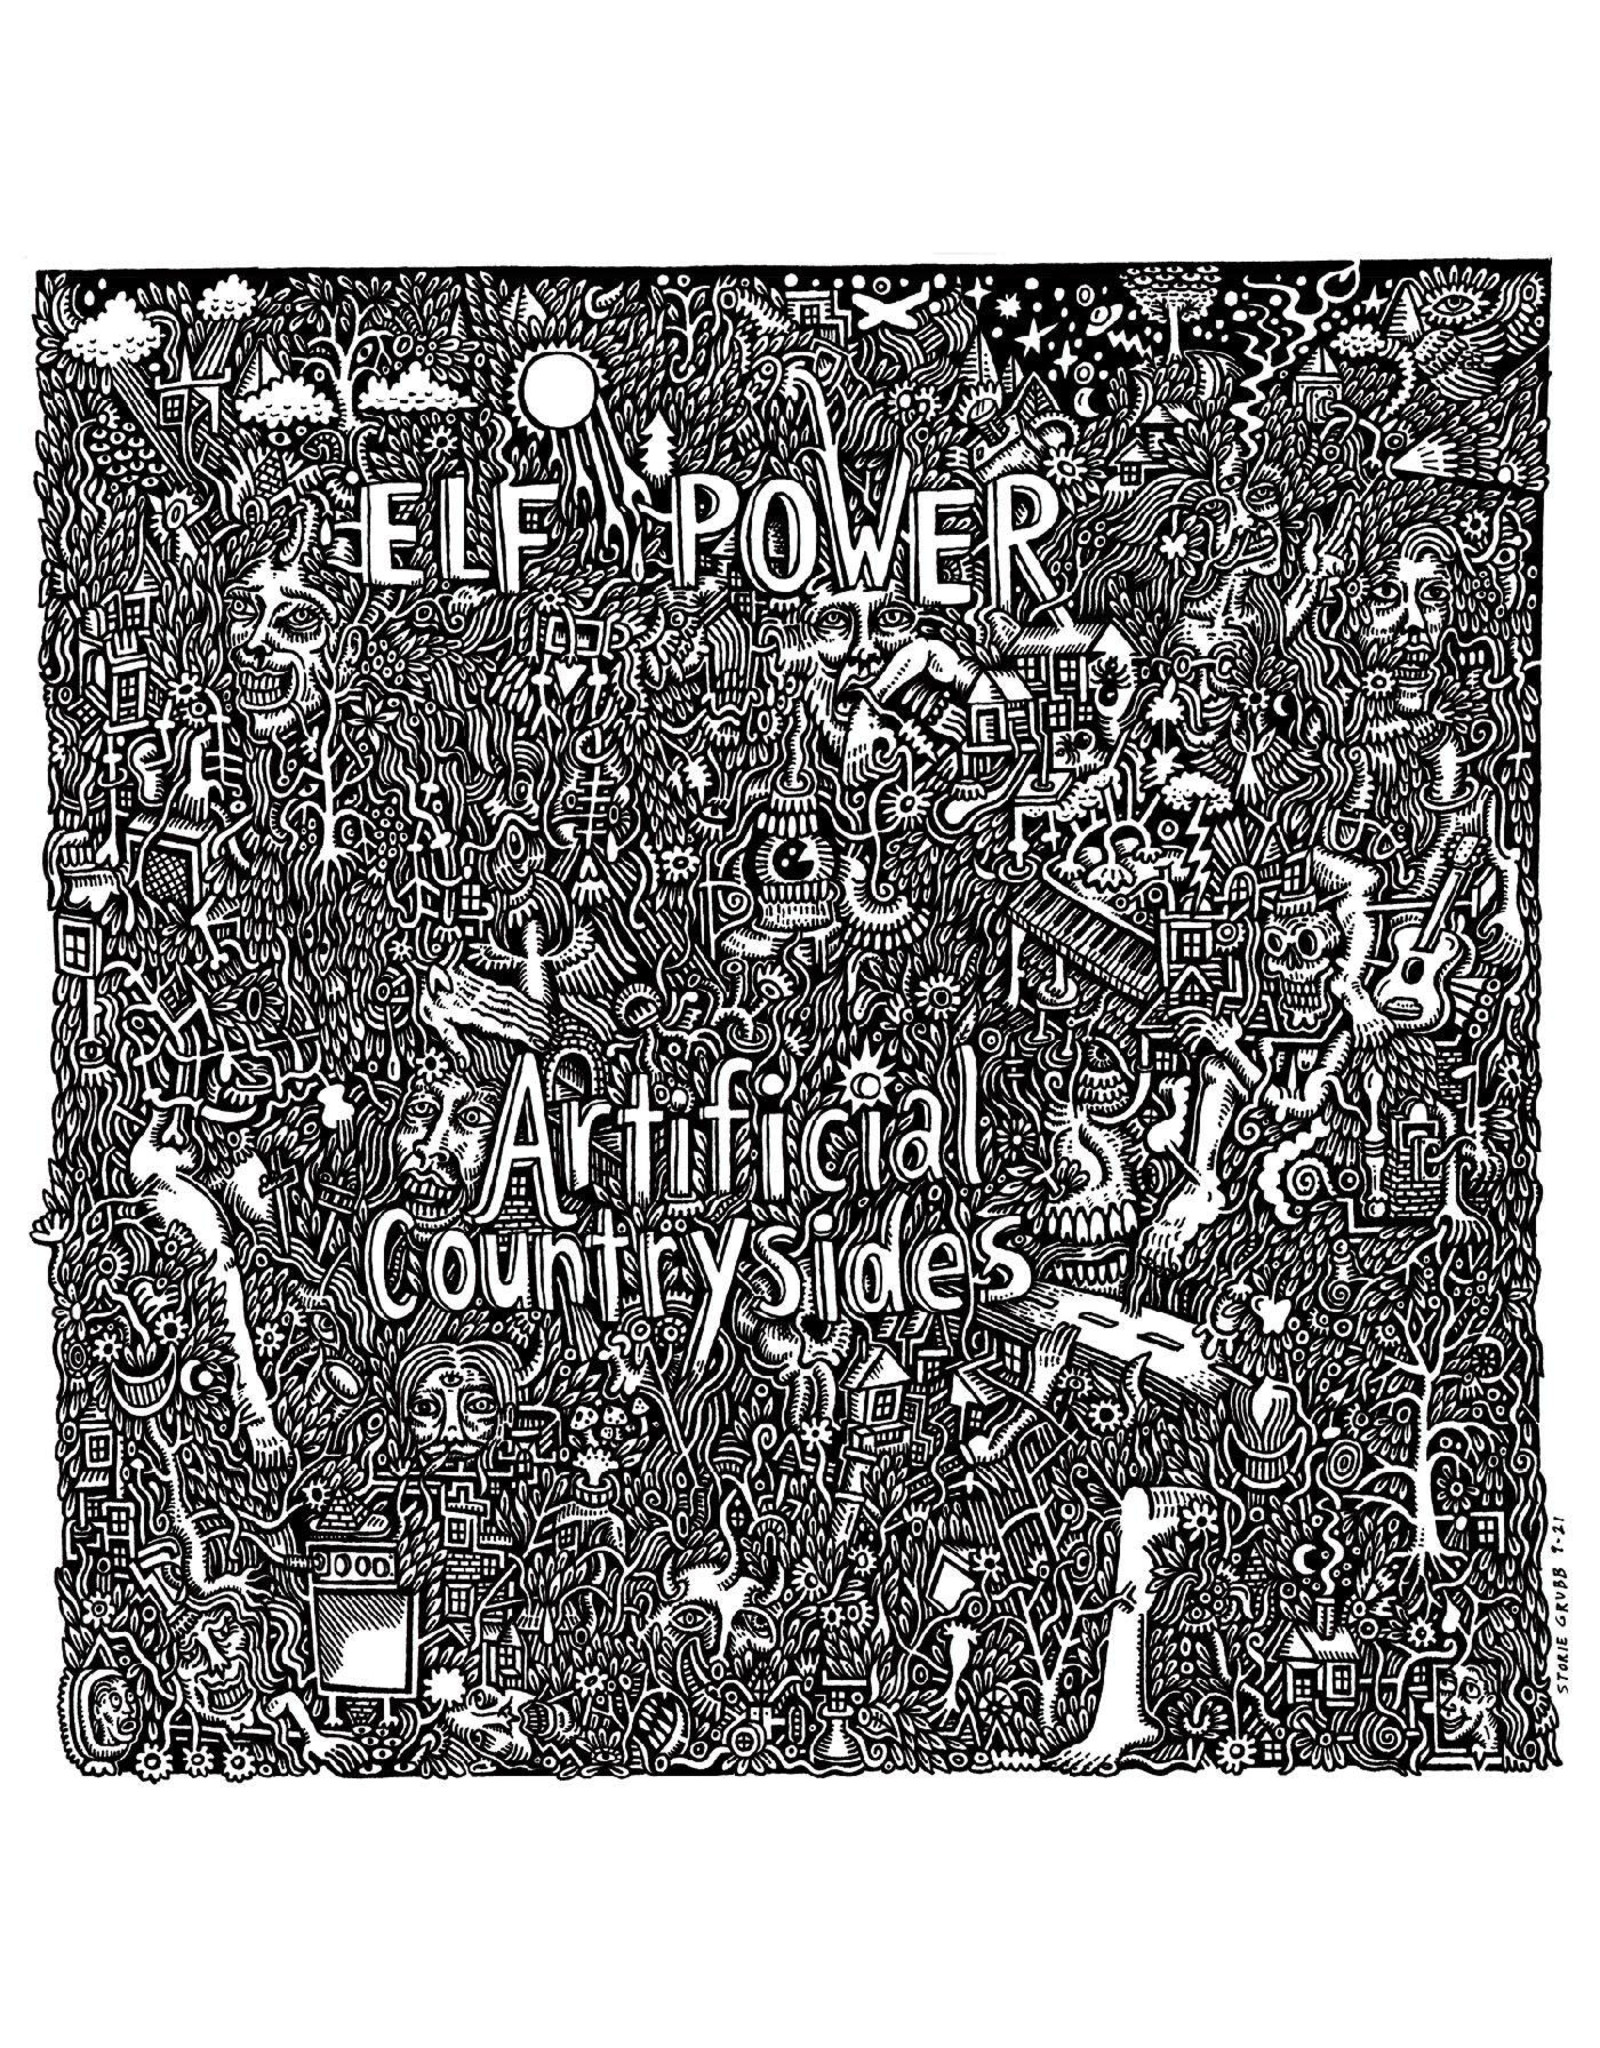 New Vinyl Elf Power - Artificial Countrysides (Clear Purple) LP